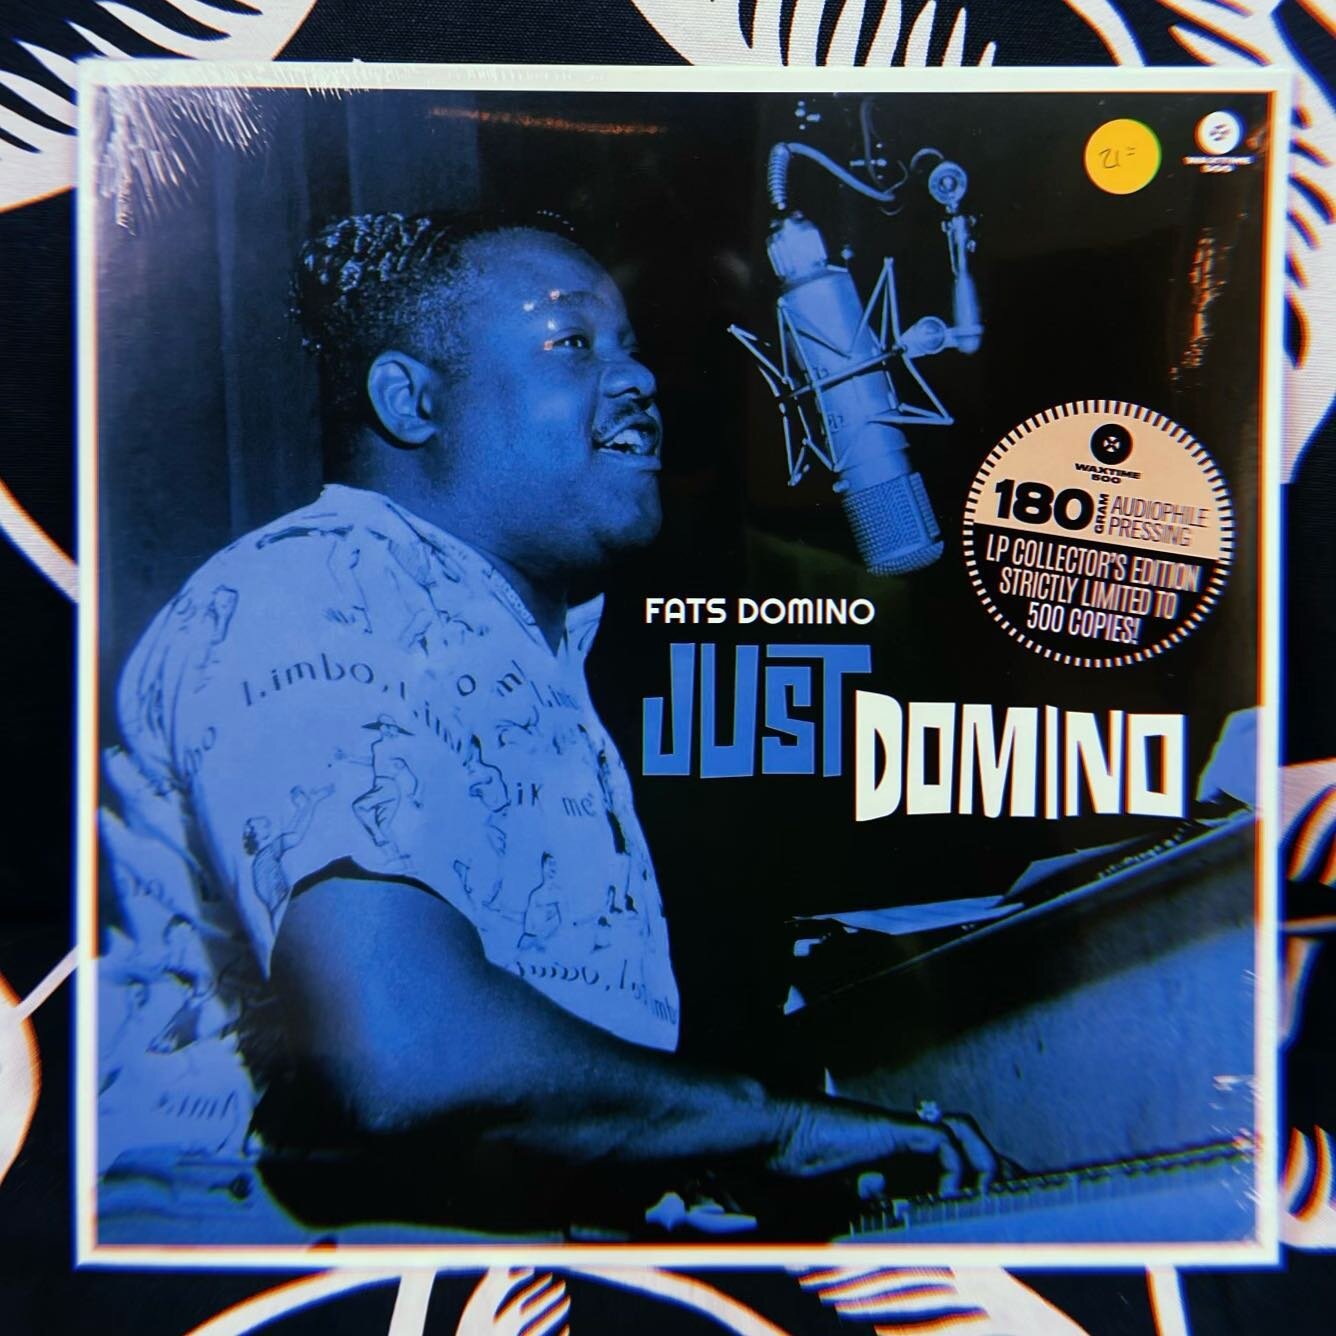 It&rsquo;s Wednesday! Just got tons of Fats Domino back in the stacks, in anticipation of the big fest this weekend. Deemed &ldquo;the real king of rock n&rsquo; roll&rdquo; by everyone AND Elvis, his first language was Louisiana Creole. During his t